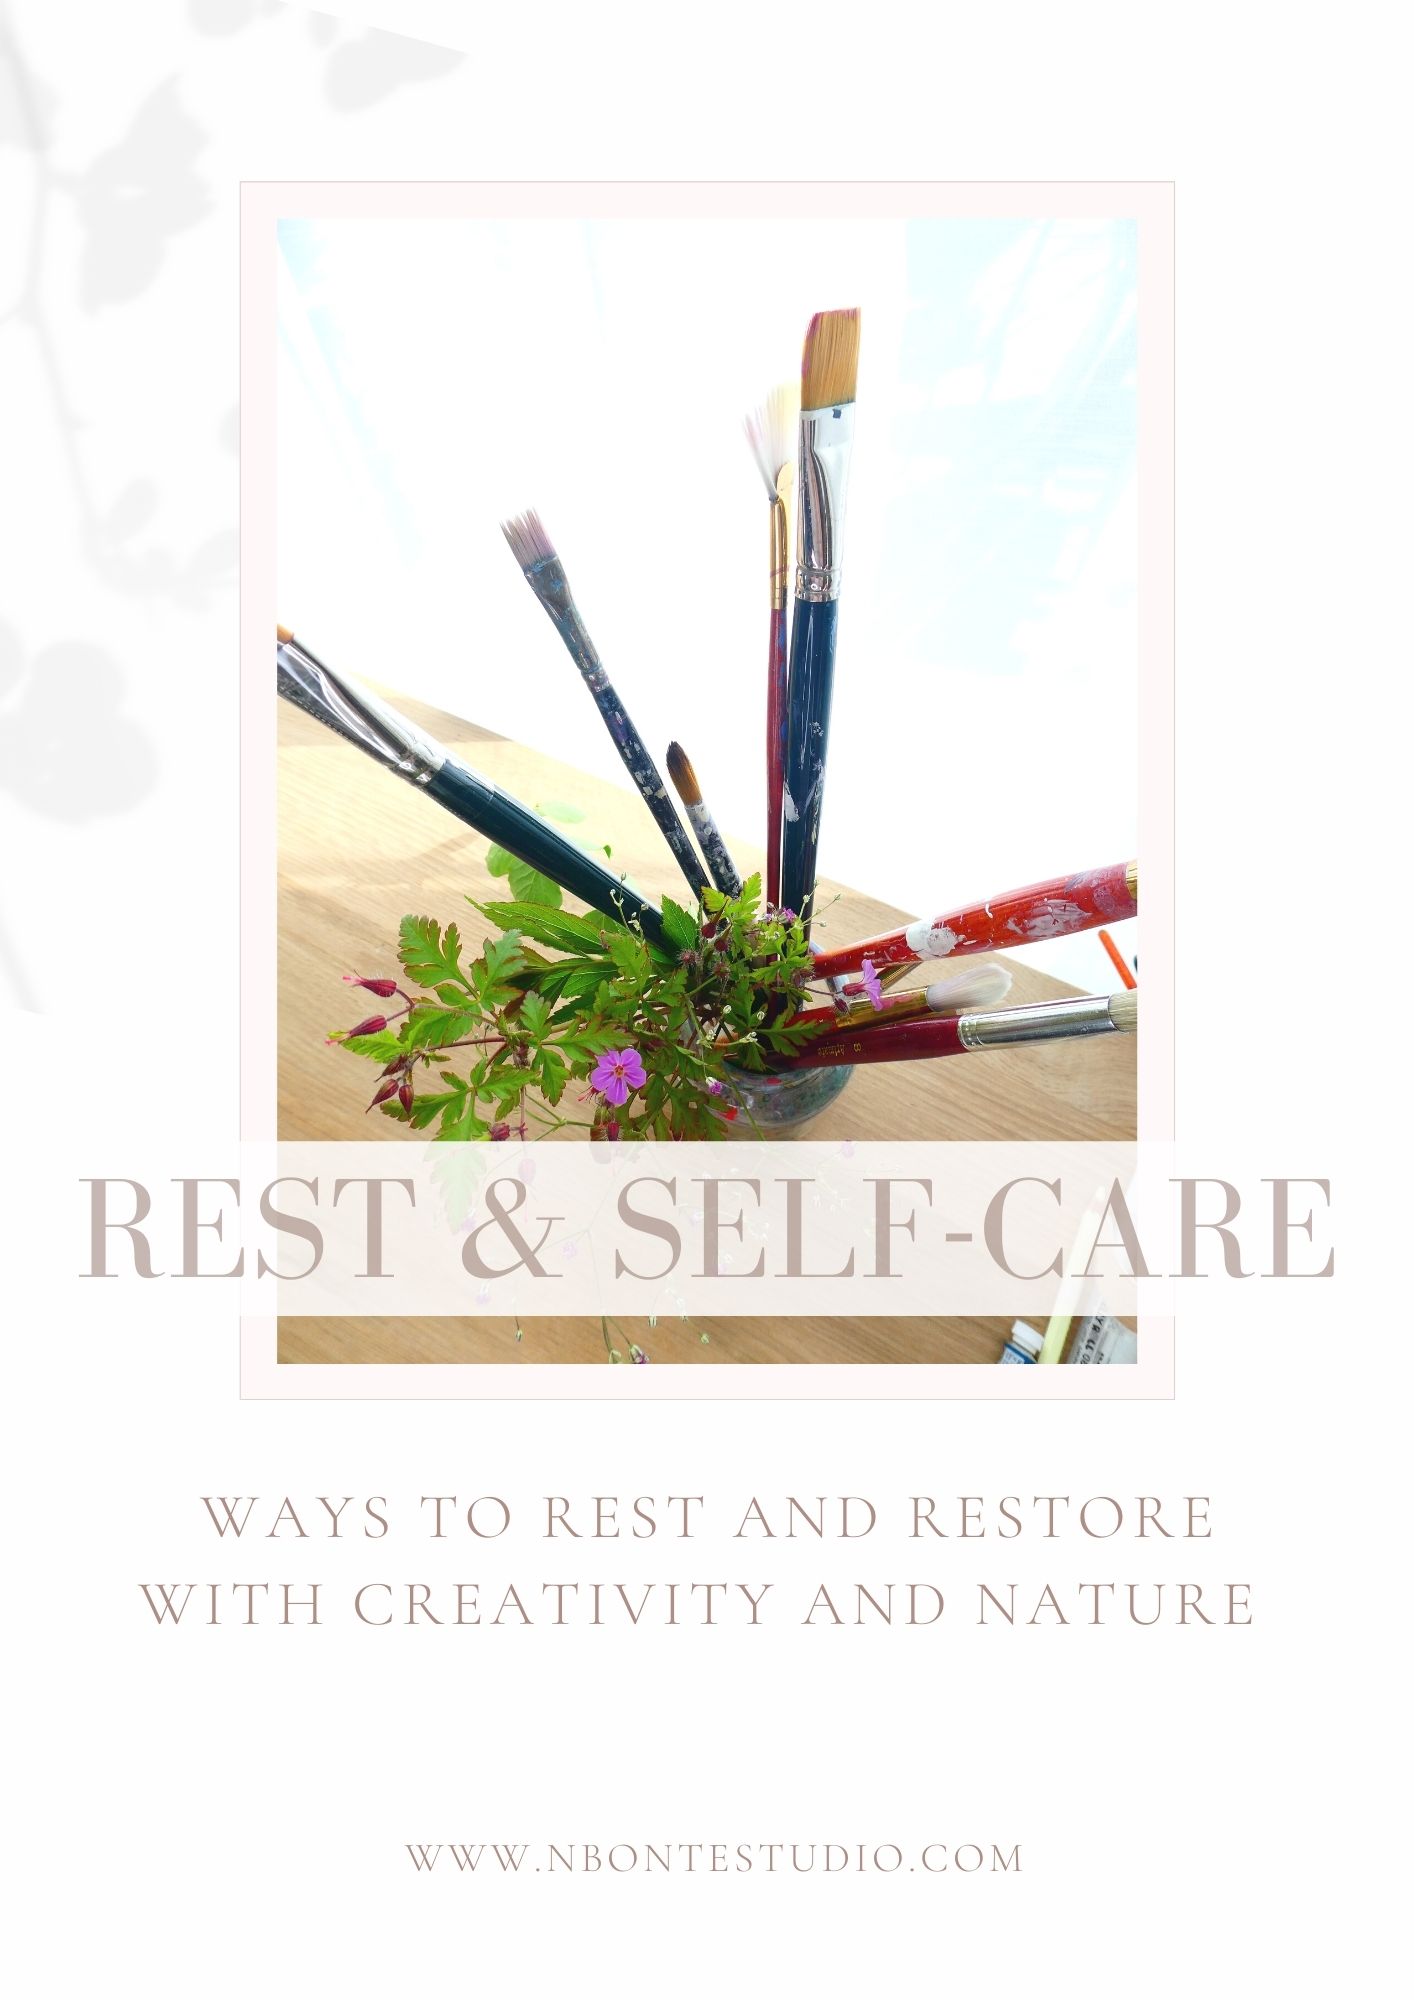 Ways to rest and restore with creativity and nature N Bonte Studio (1)